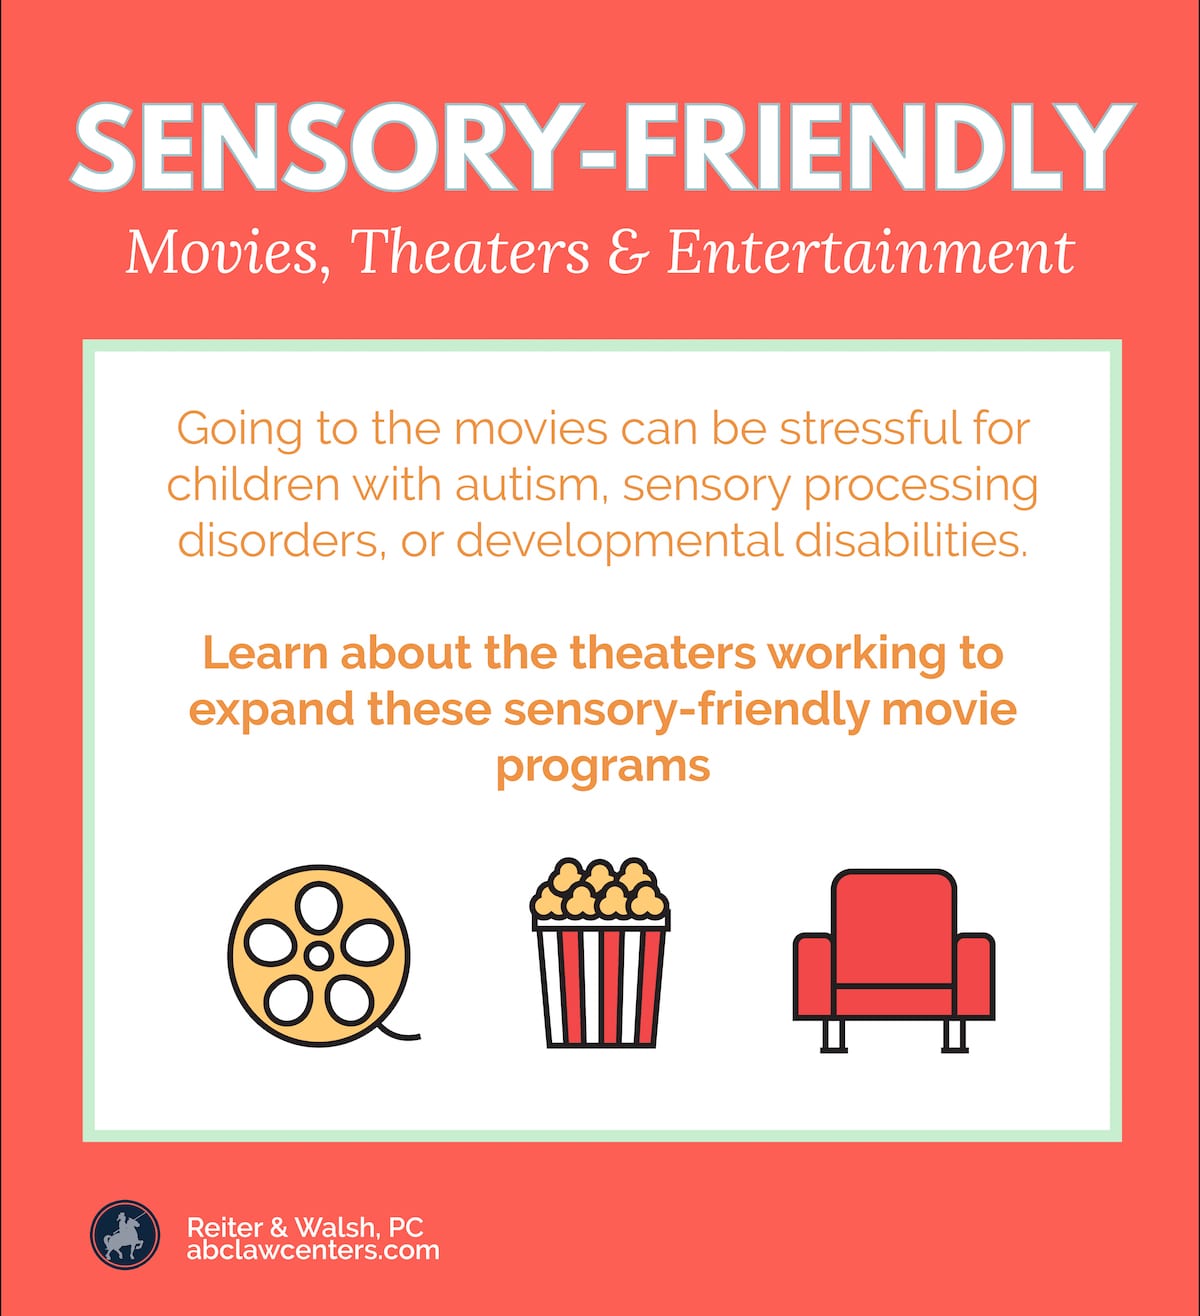 Sensory-Friendly Movies and Entertainment